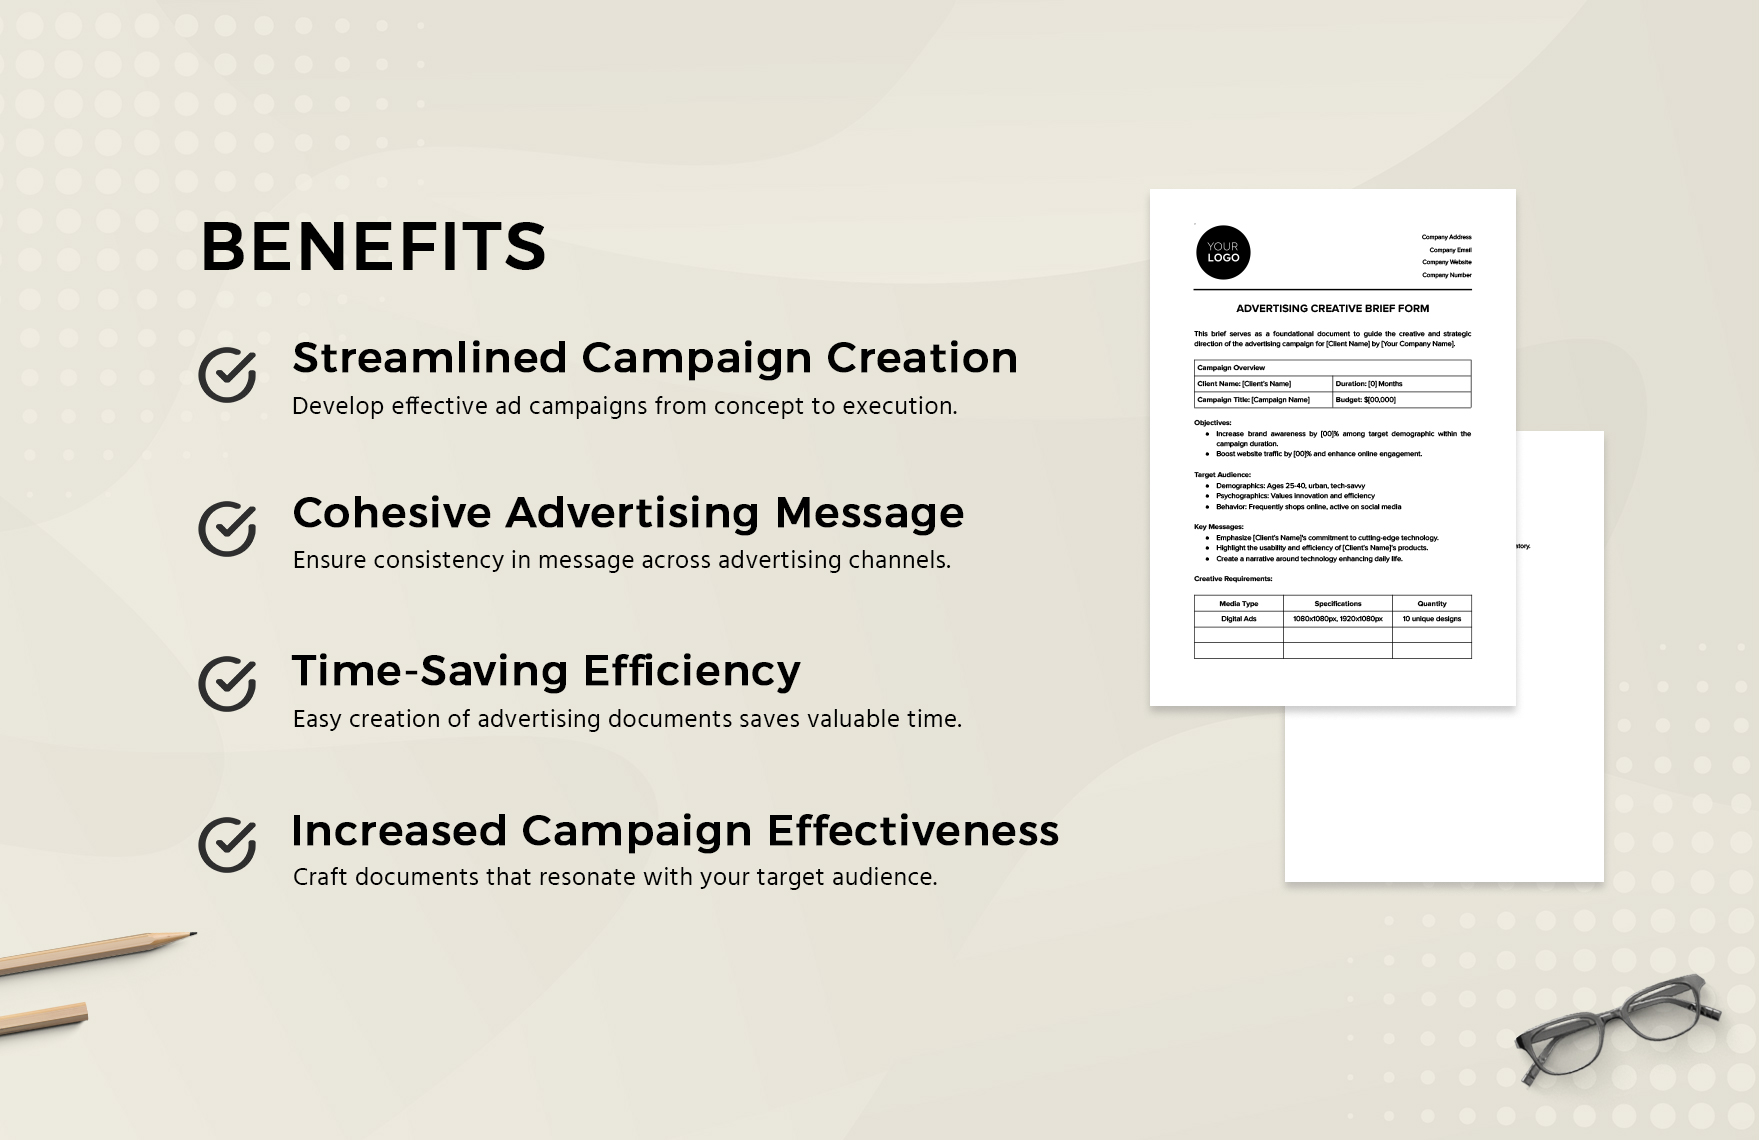 Advertising Creative Brief Form Template